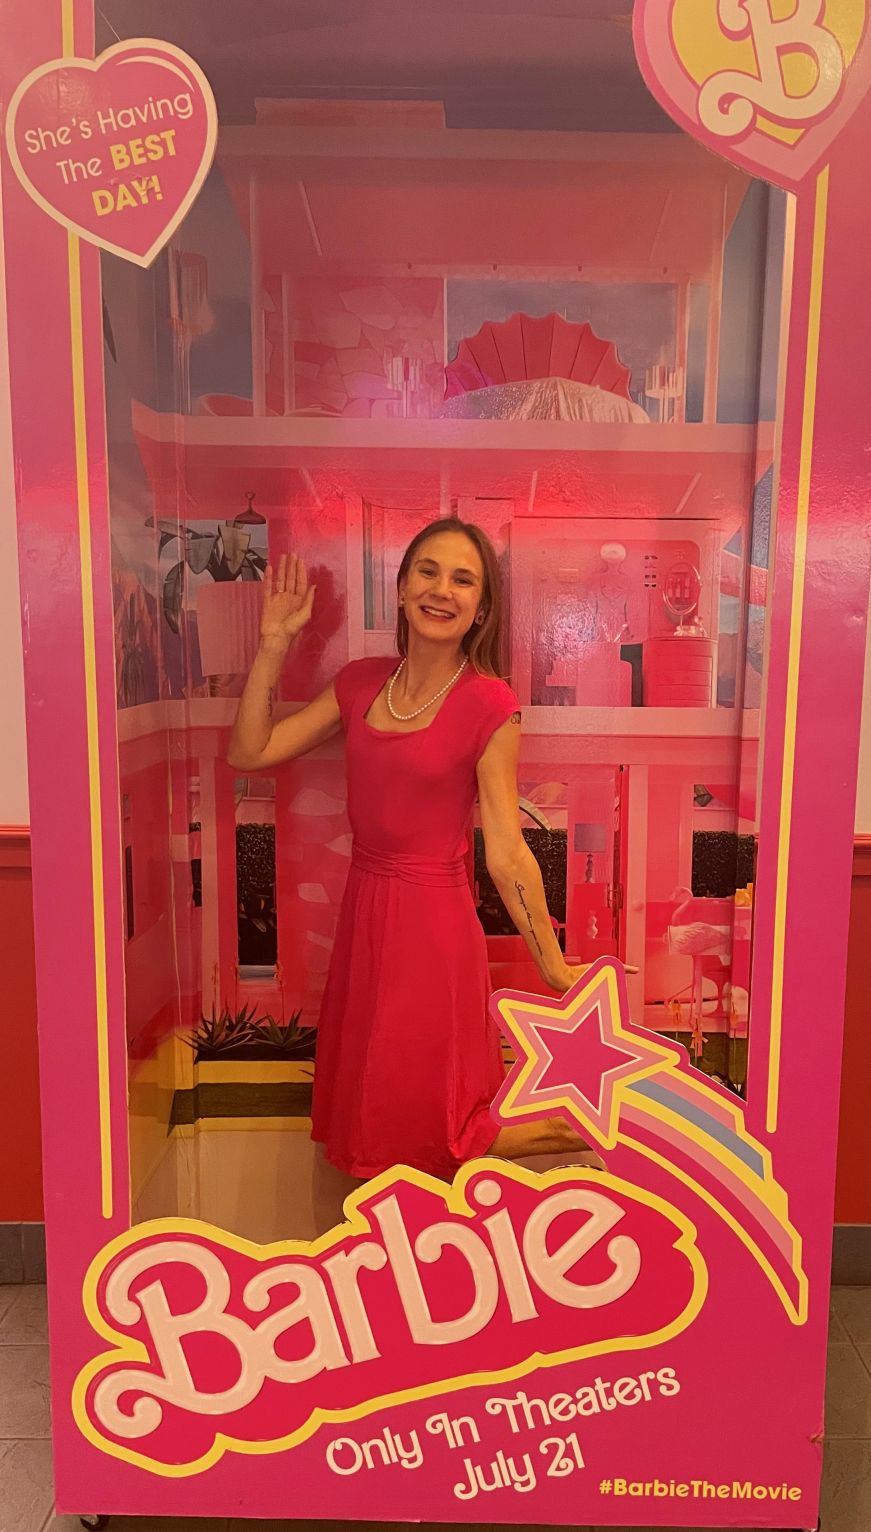 Stacy wearing a pink dress and posing in a life-size Barbie box